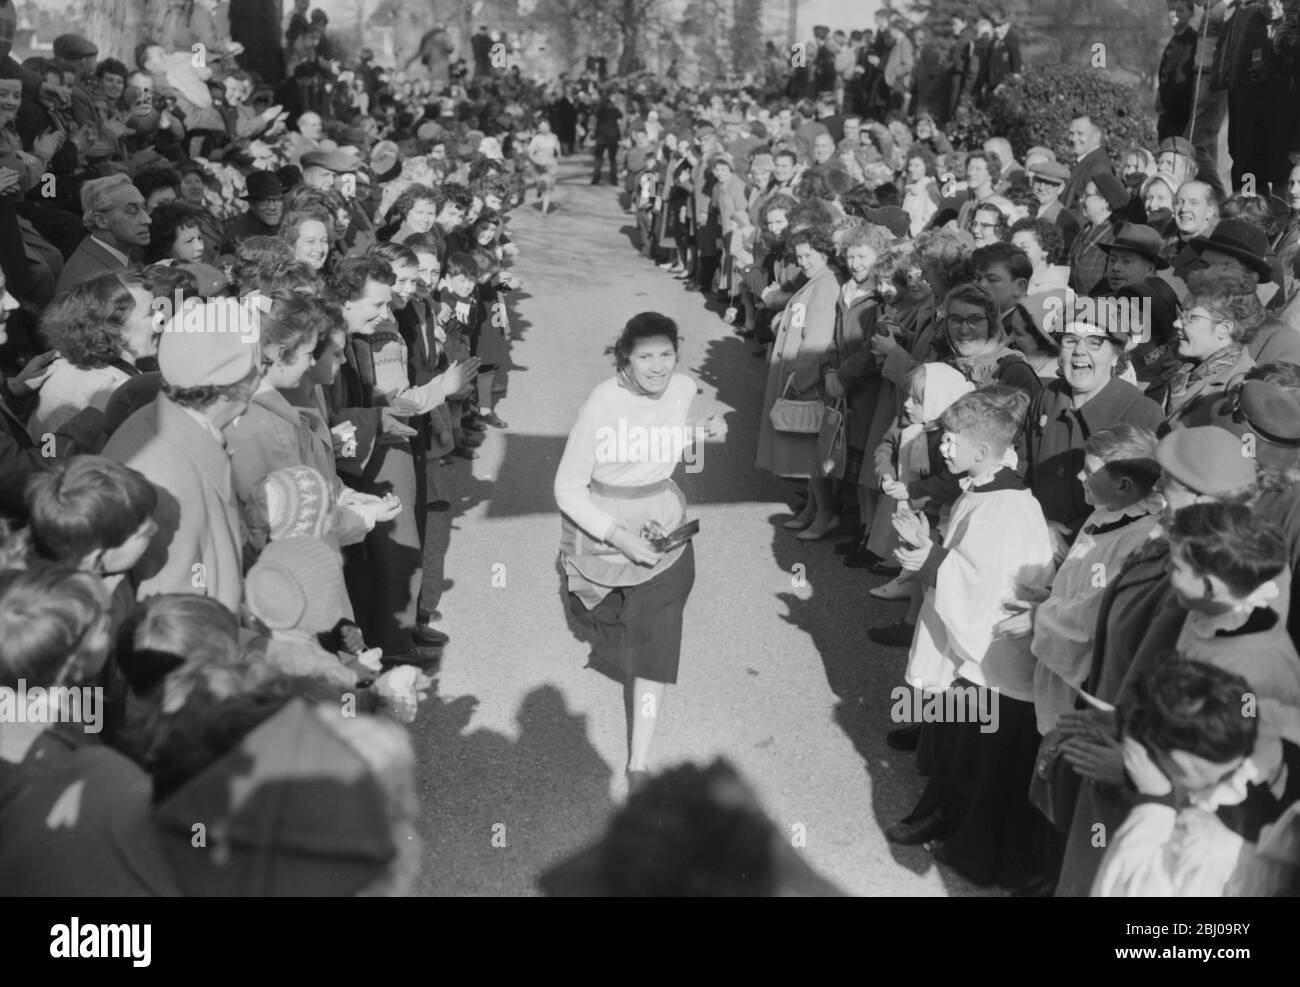 14 FEBRUARY 1961 - CAROL VORLEY - 19 YEAR OLD WINNER OF THE OLNEY PANCAKE RACE AT THE FINISHING LINE AFTER COMPLETING THE 415 YARD COURSE IN 1 MINUTE AND 14 SECONDS. THE RACE DATES BACK TO 1445 AND WAS REVIVED BY THE LOCAL VICAR IN 1946. - OLNEY, BUCKINGHAMSHIRE, ENGLAND Stock Photo